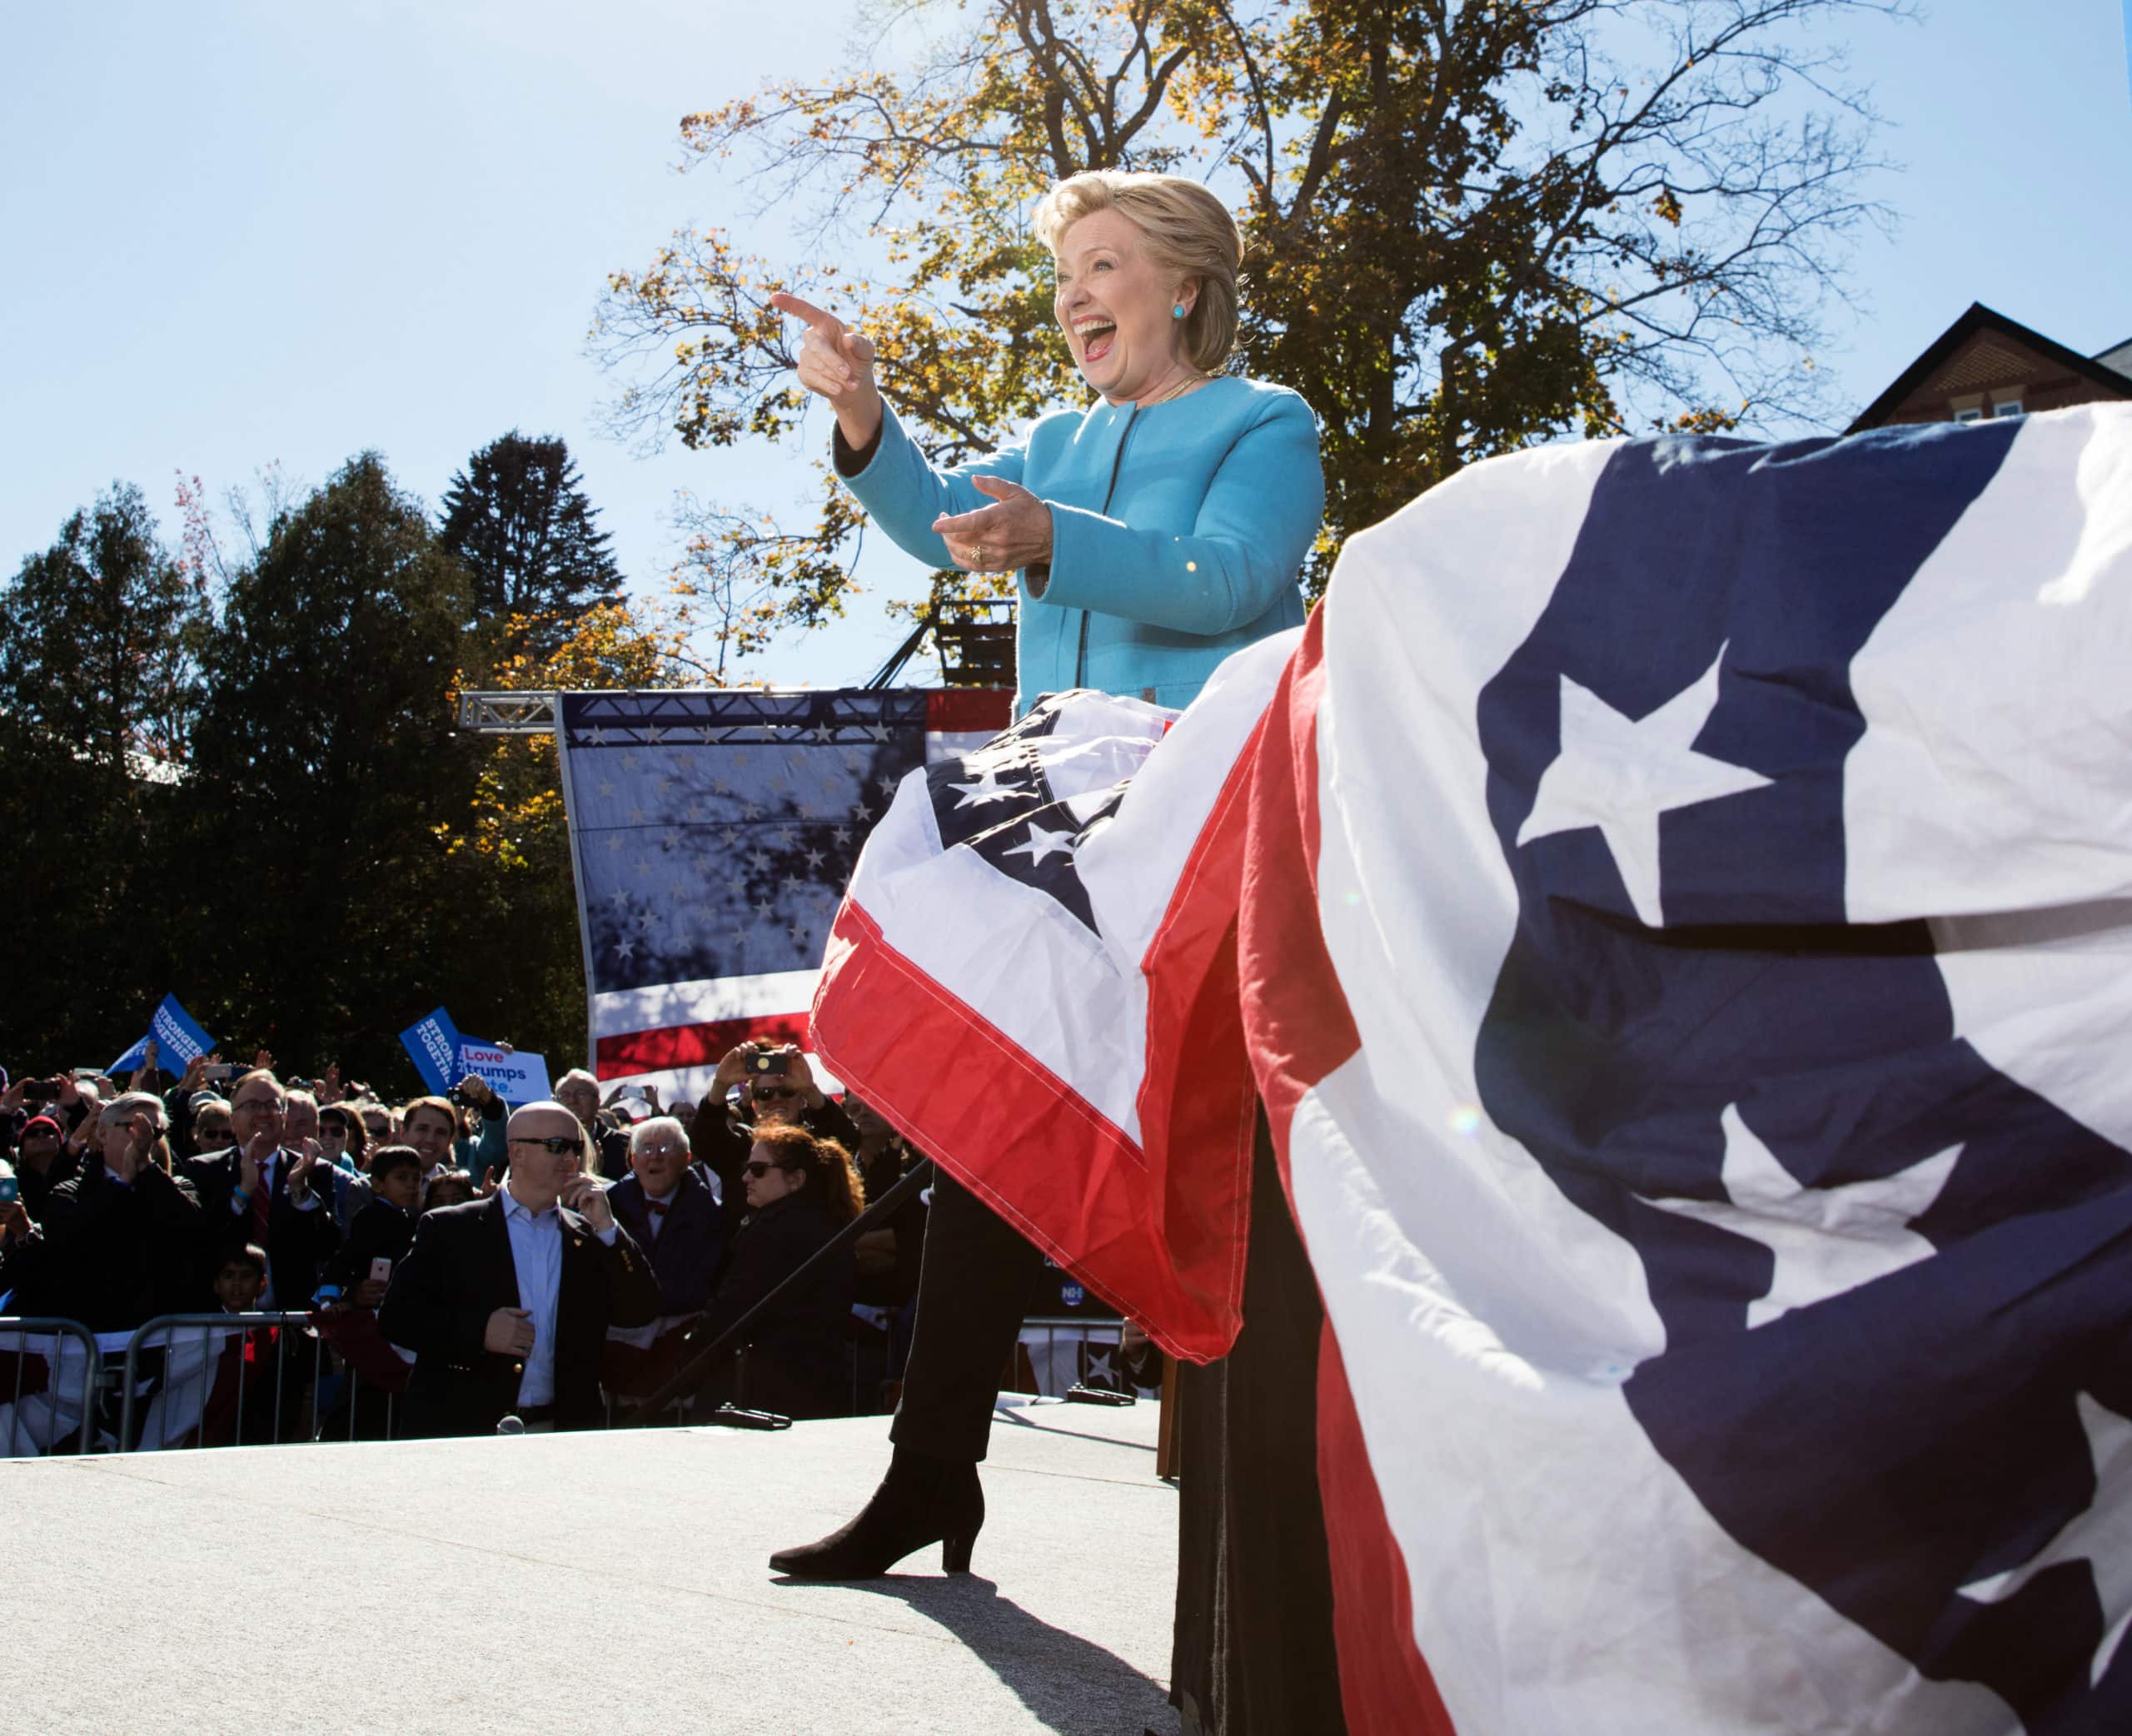 Hillary Clinton, St. Anselm College, Manchester, New Hampshire, Oct. 24, 2016